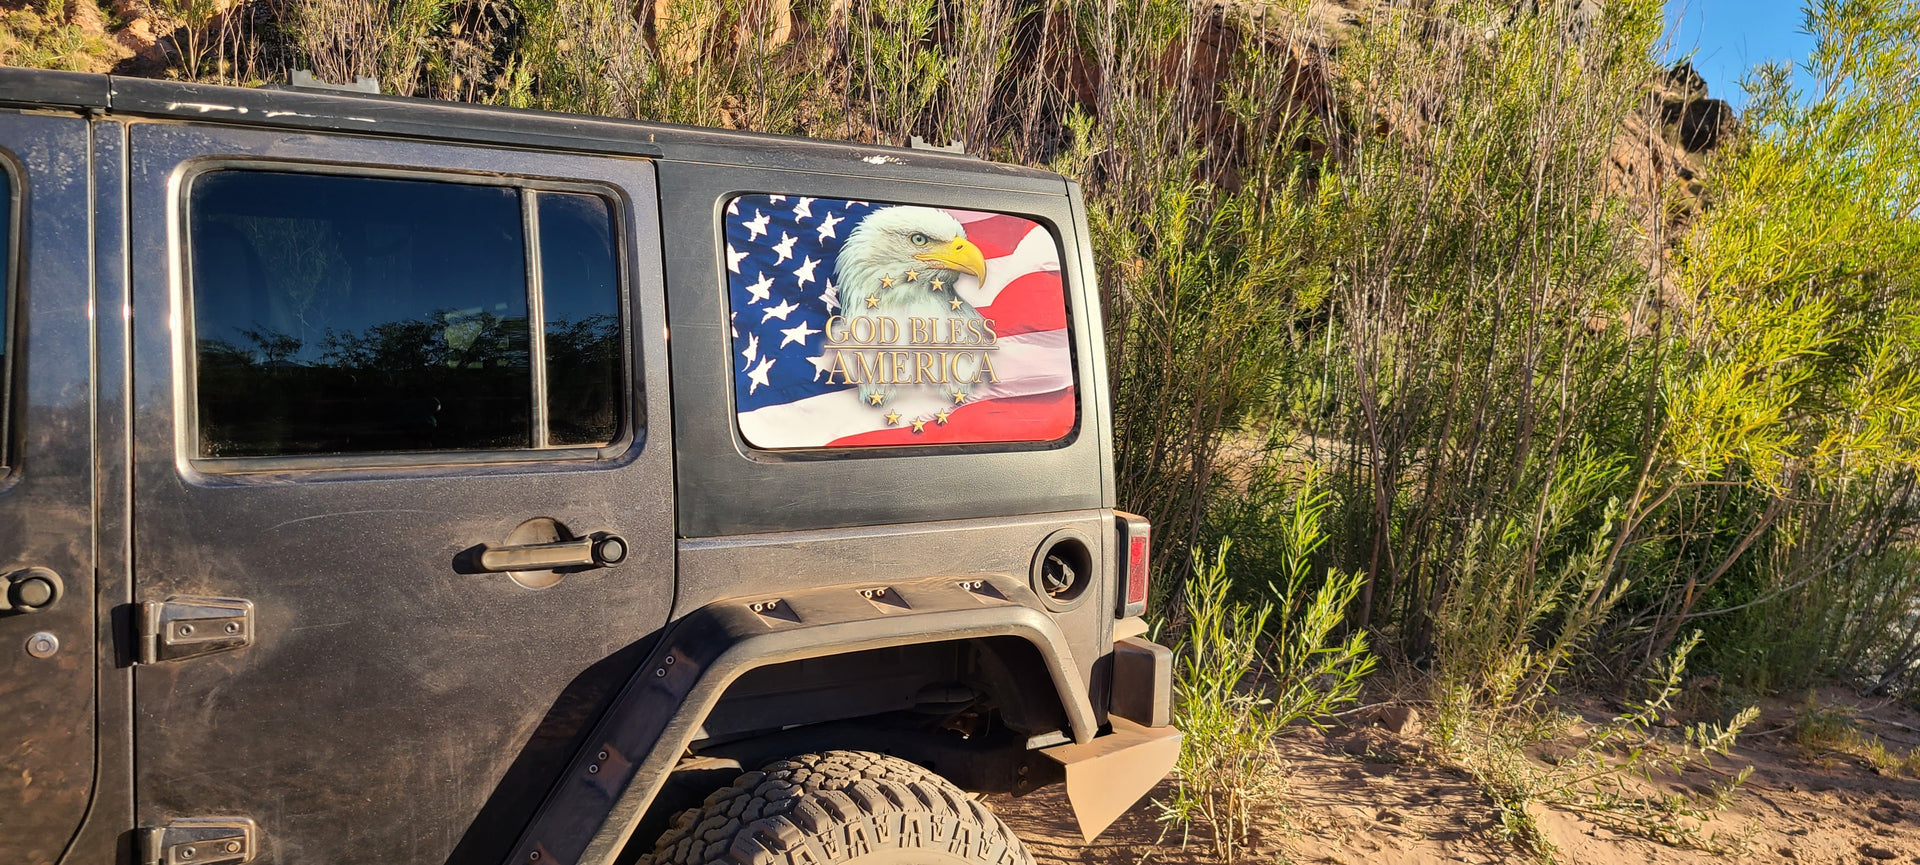 God Bless America Flag and Eagle - Crosscountrycreations